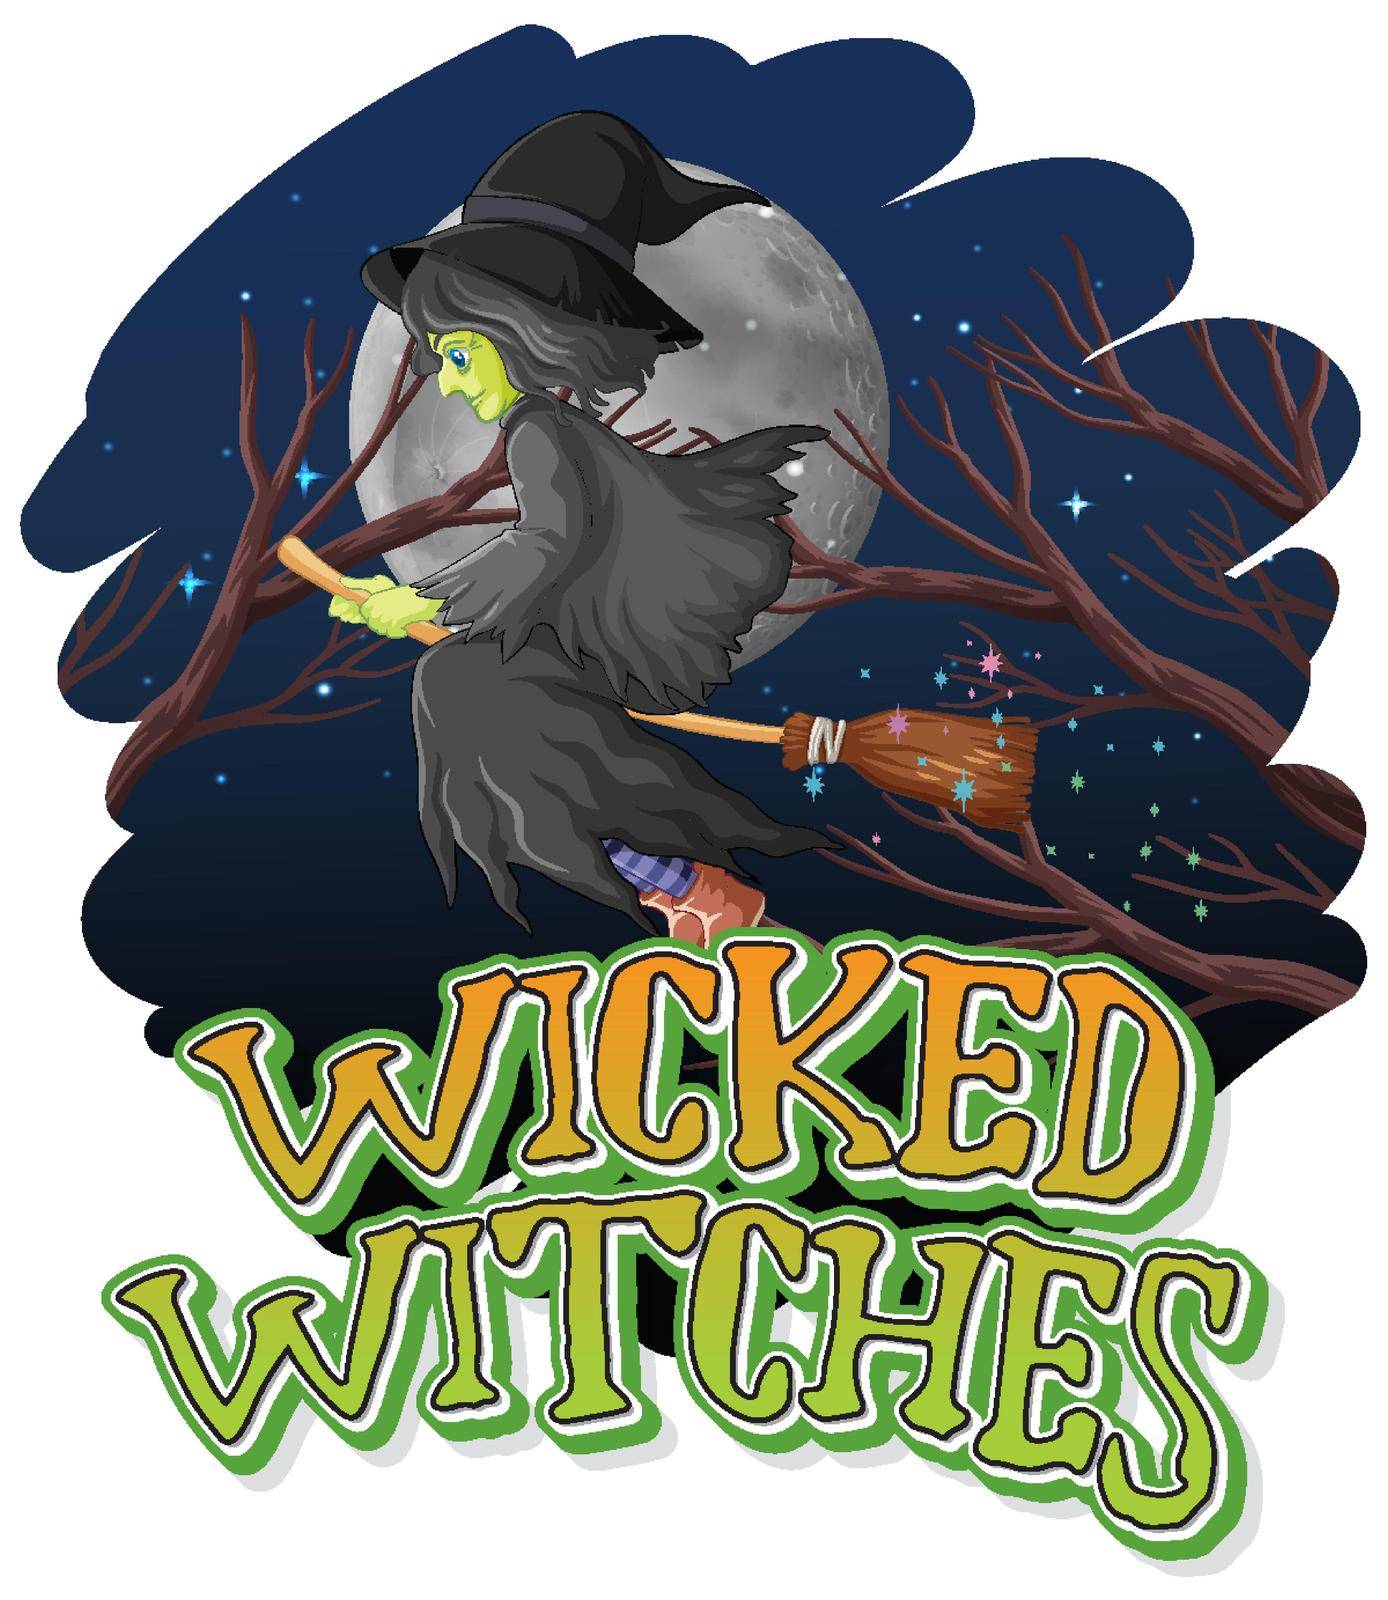 Wicked witches on night background illustration